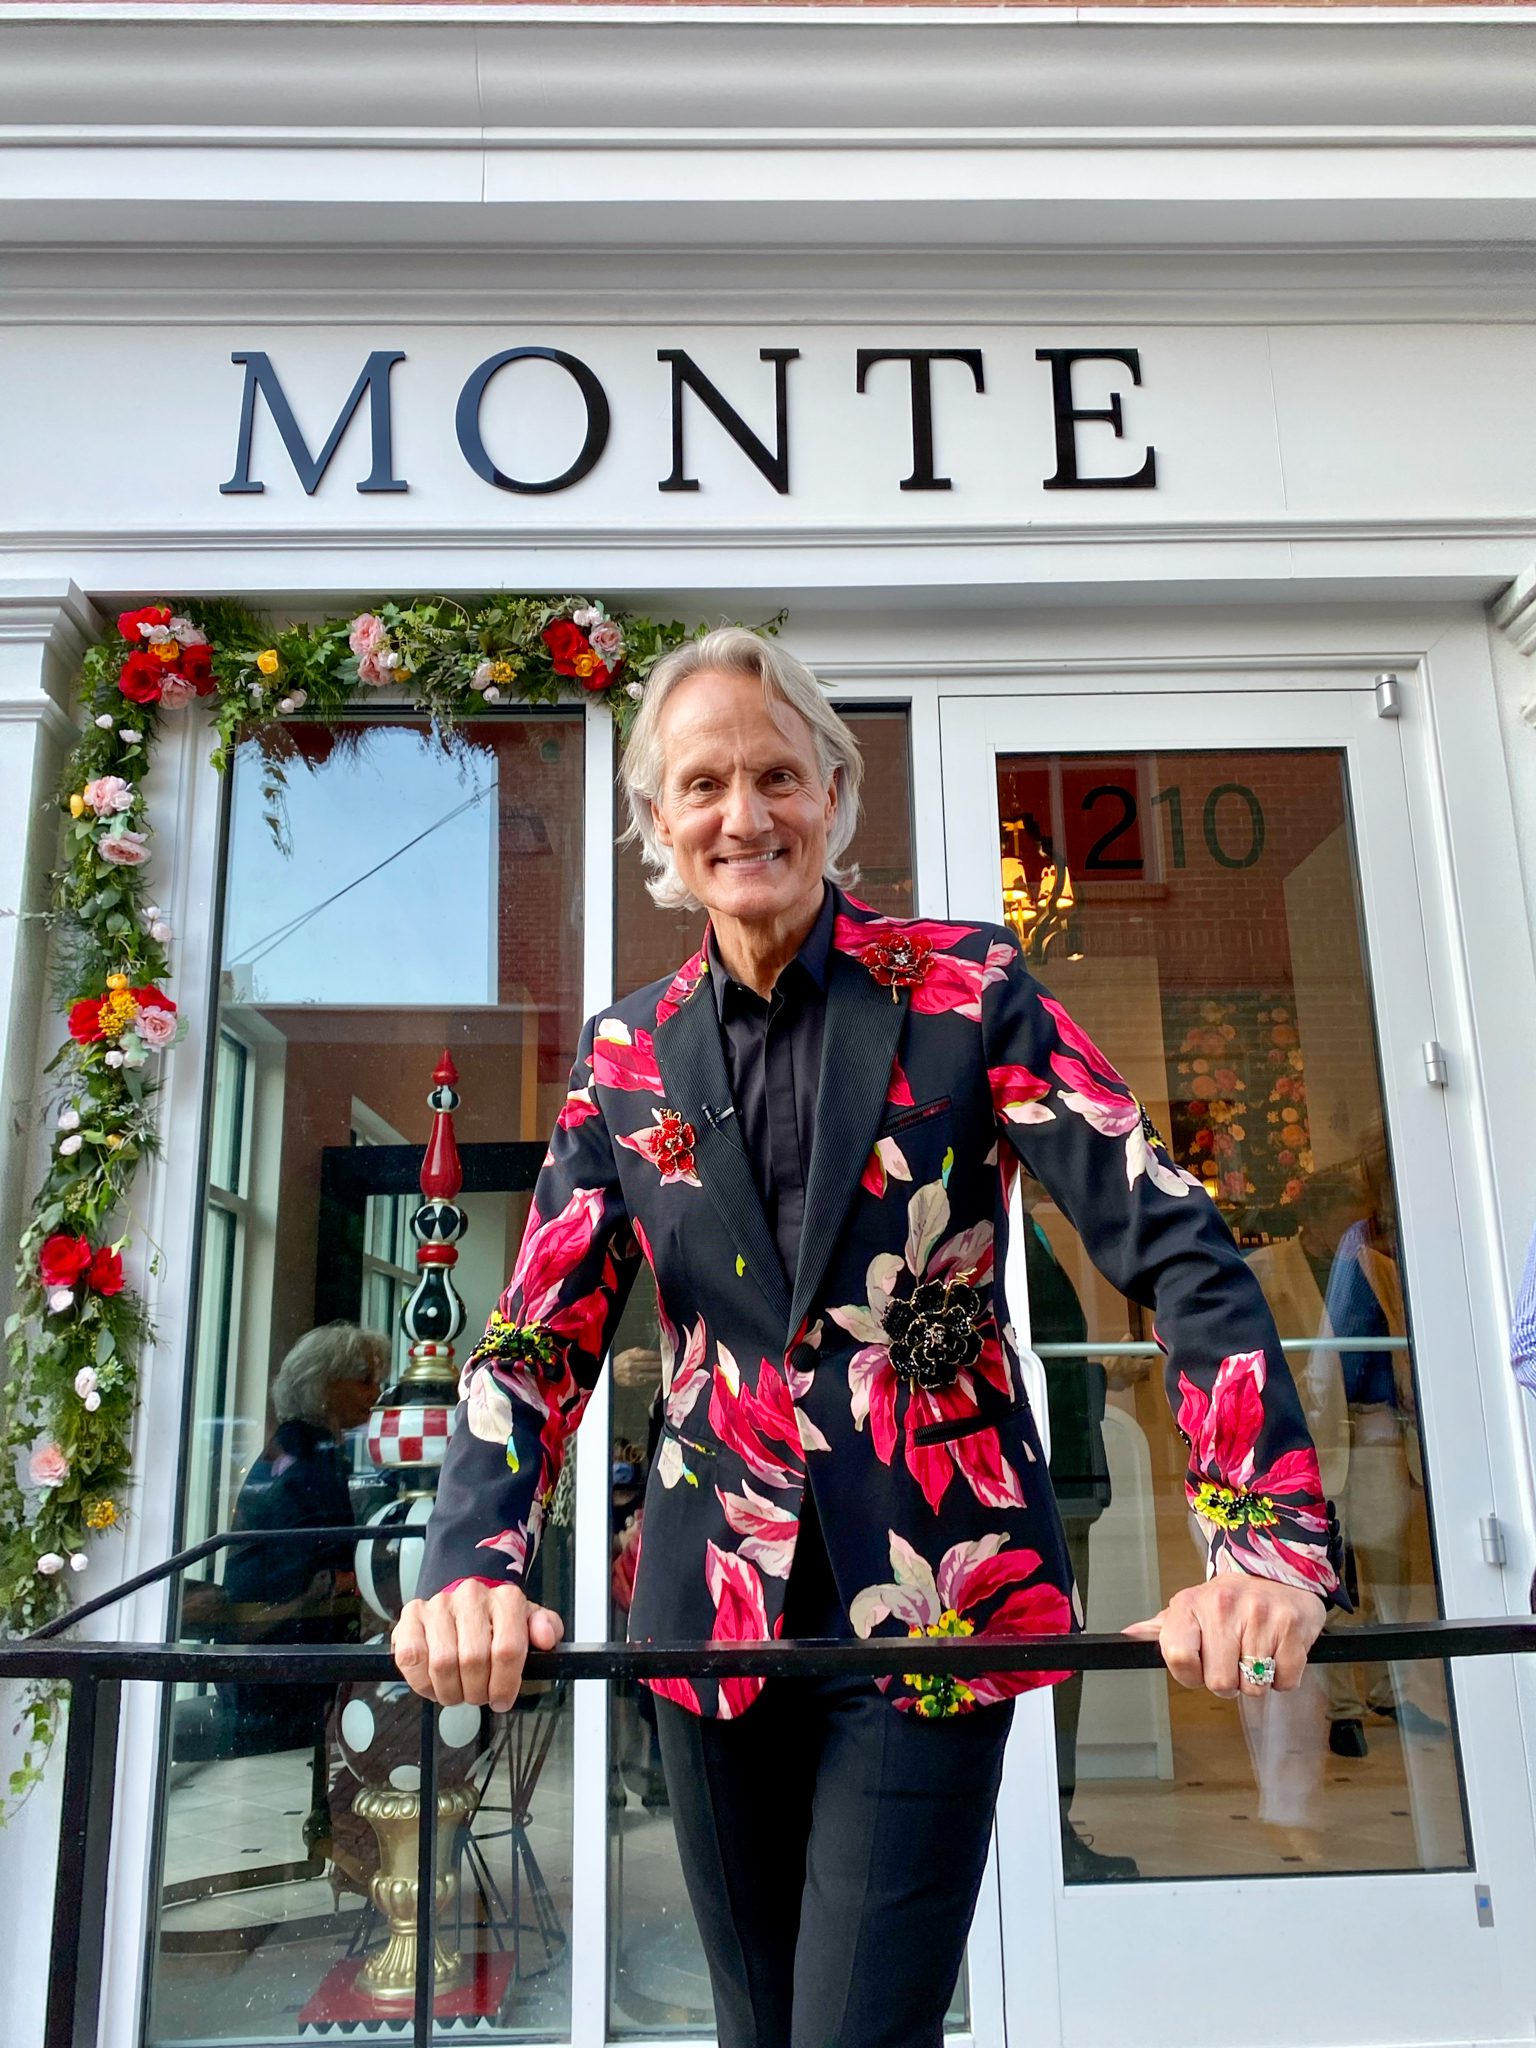 Salon MONTE Opens with a Ribbon Cutting in Old Town - The Zebra